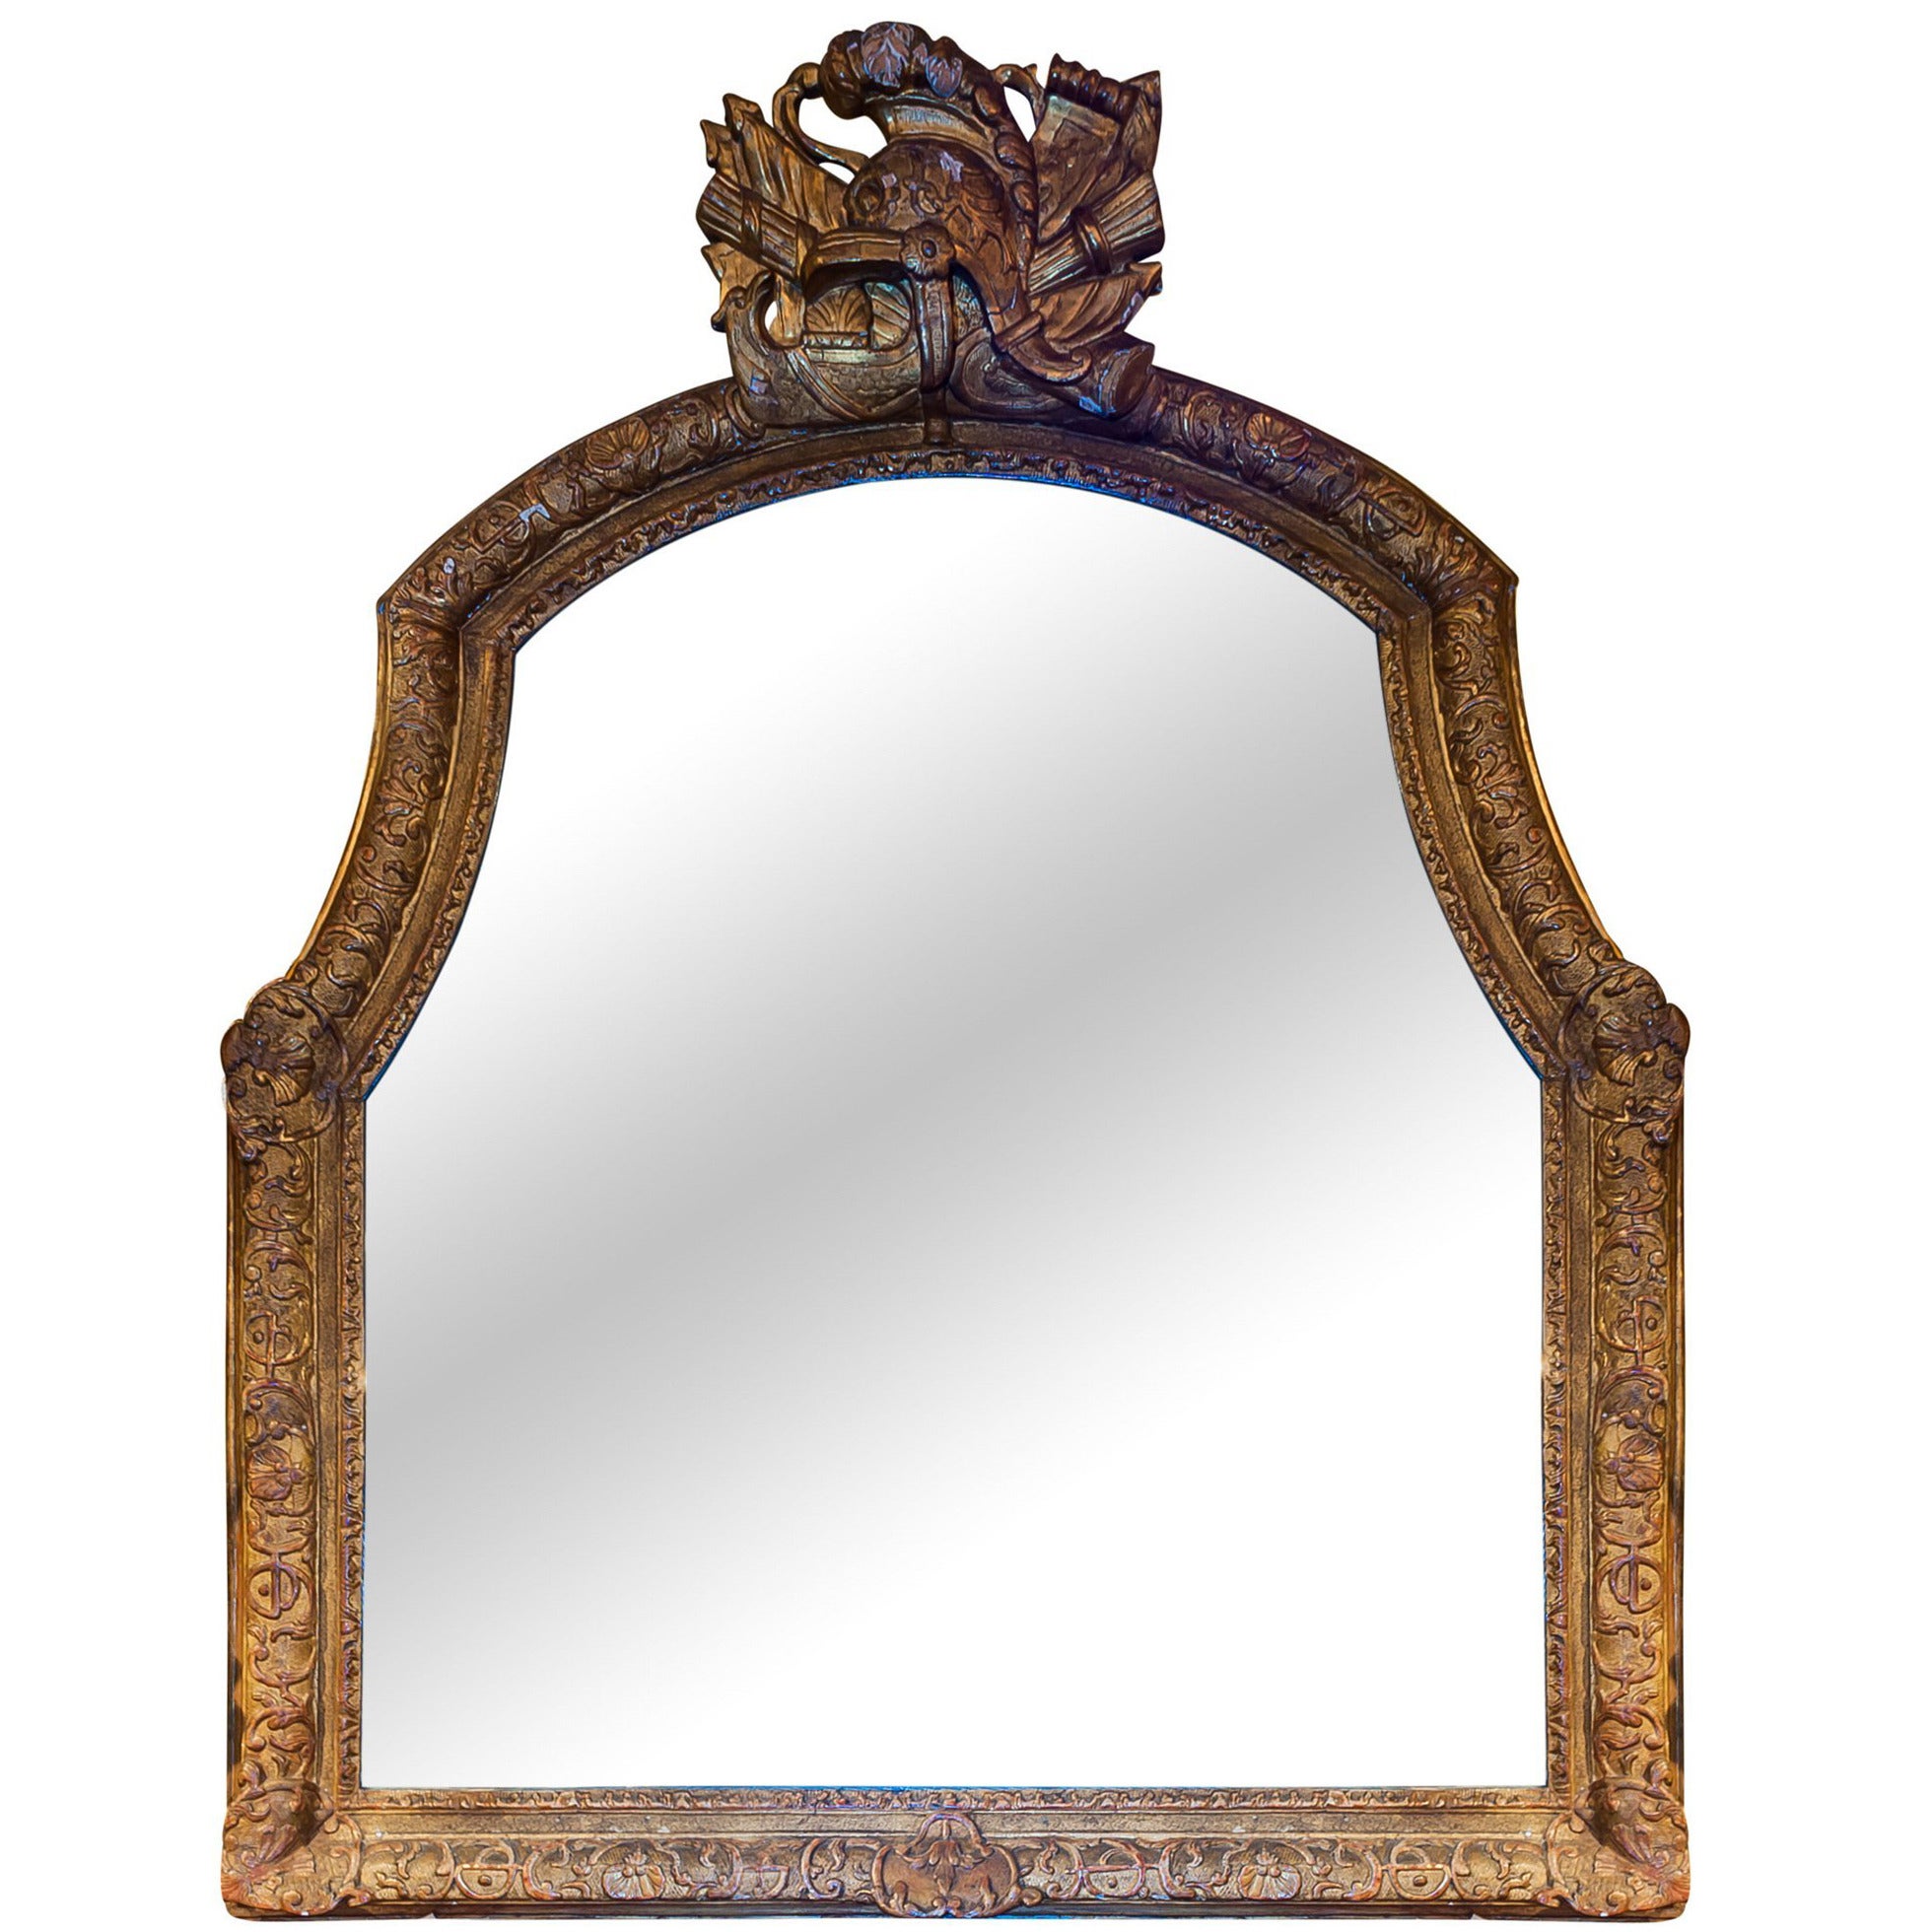 Fine Giltwood and Gesso Mantel Mirror